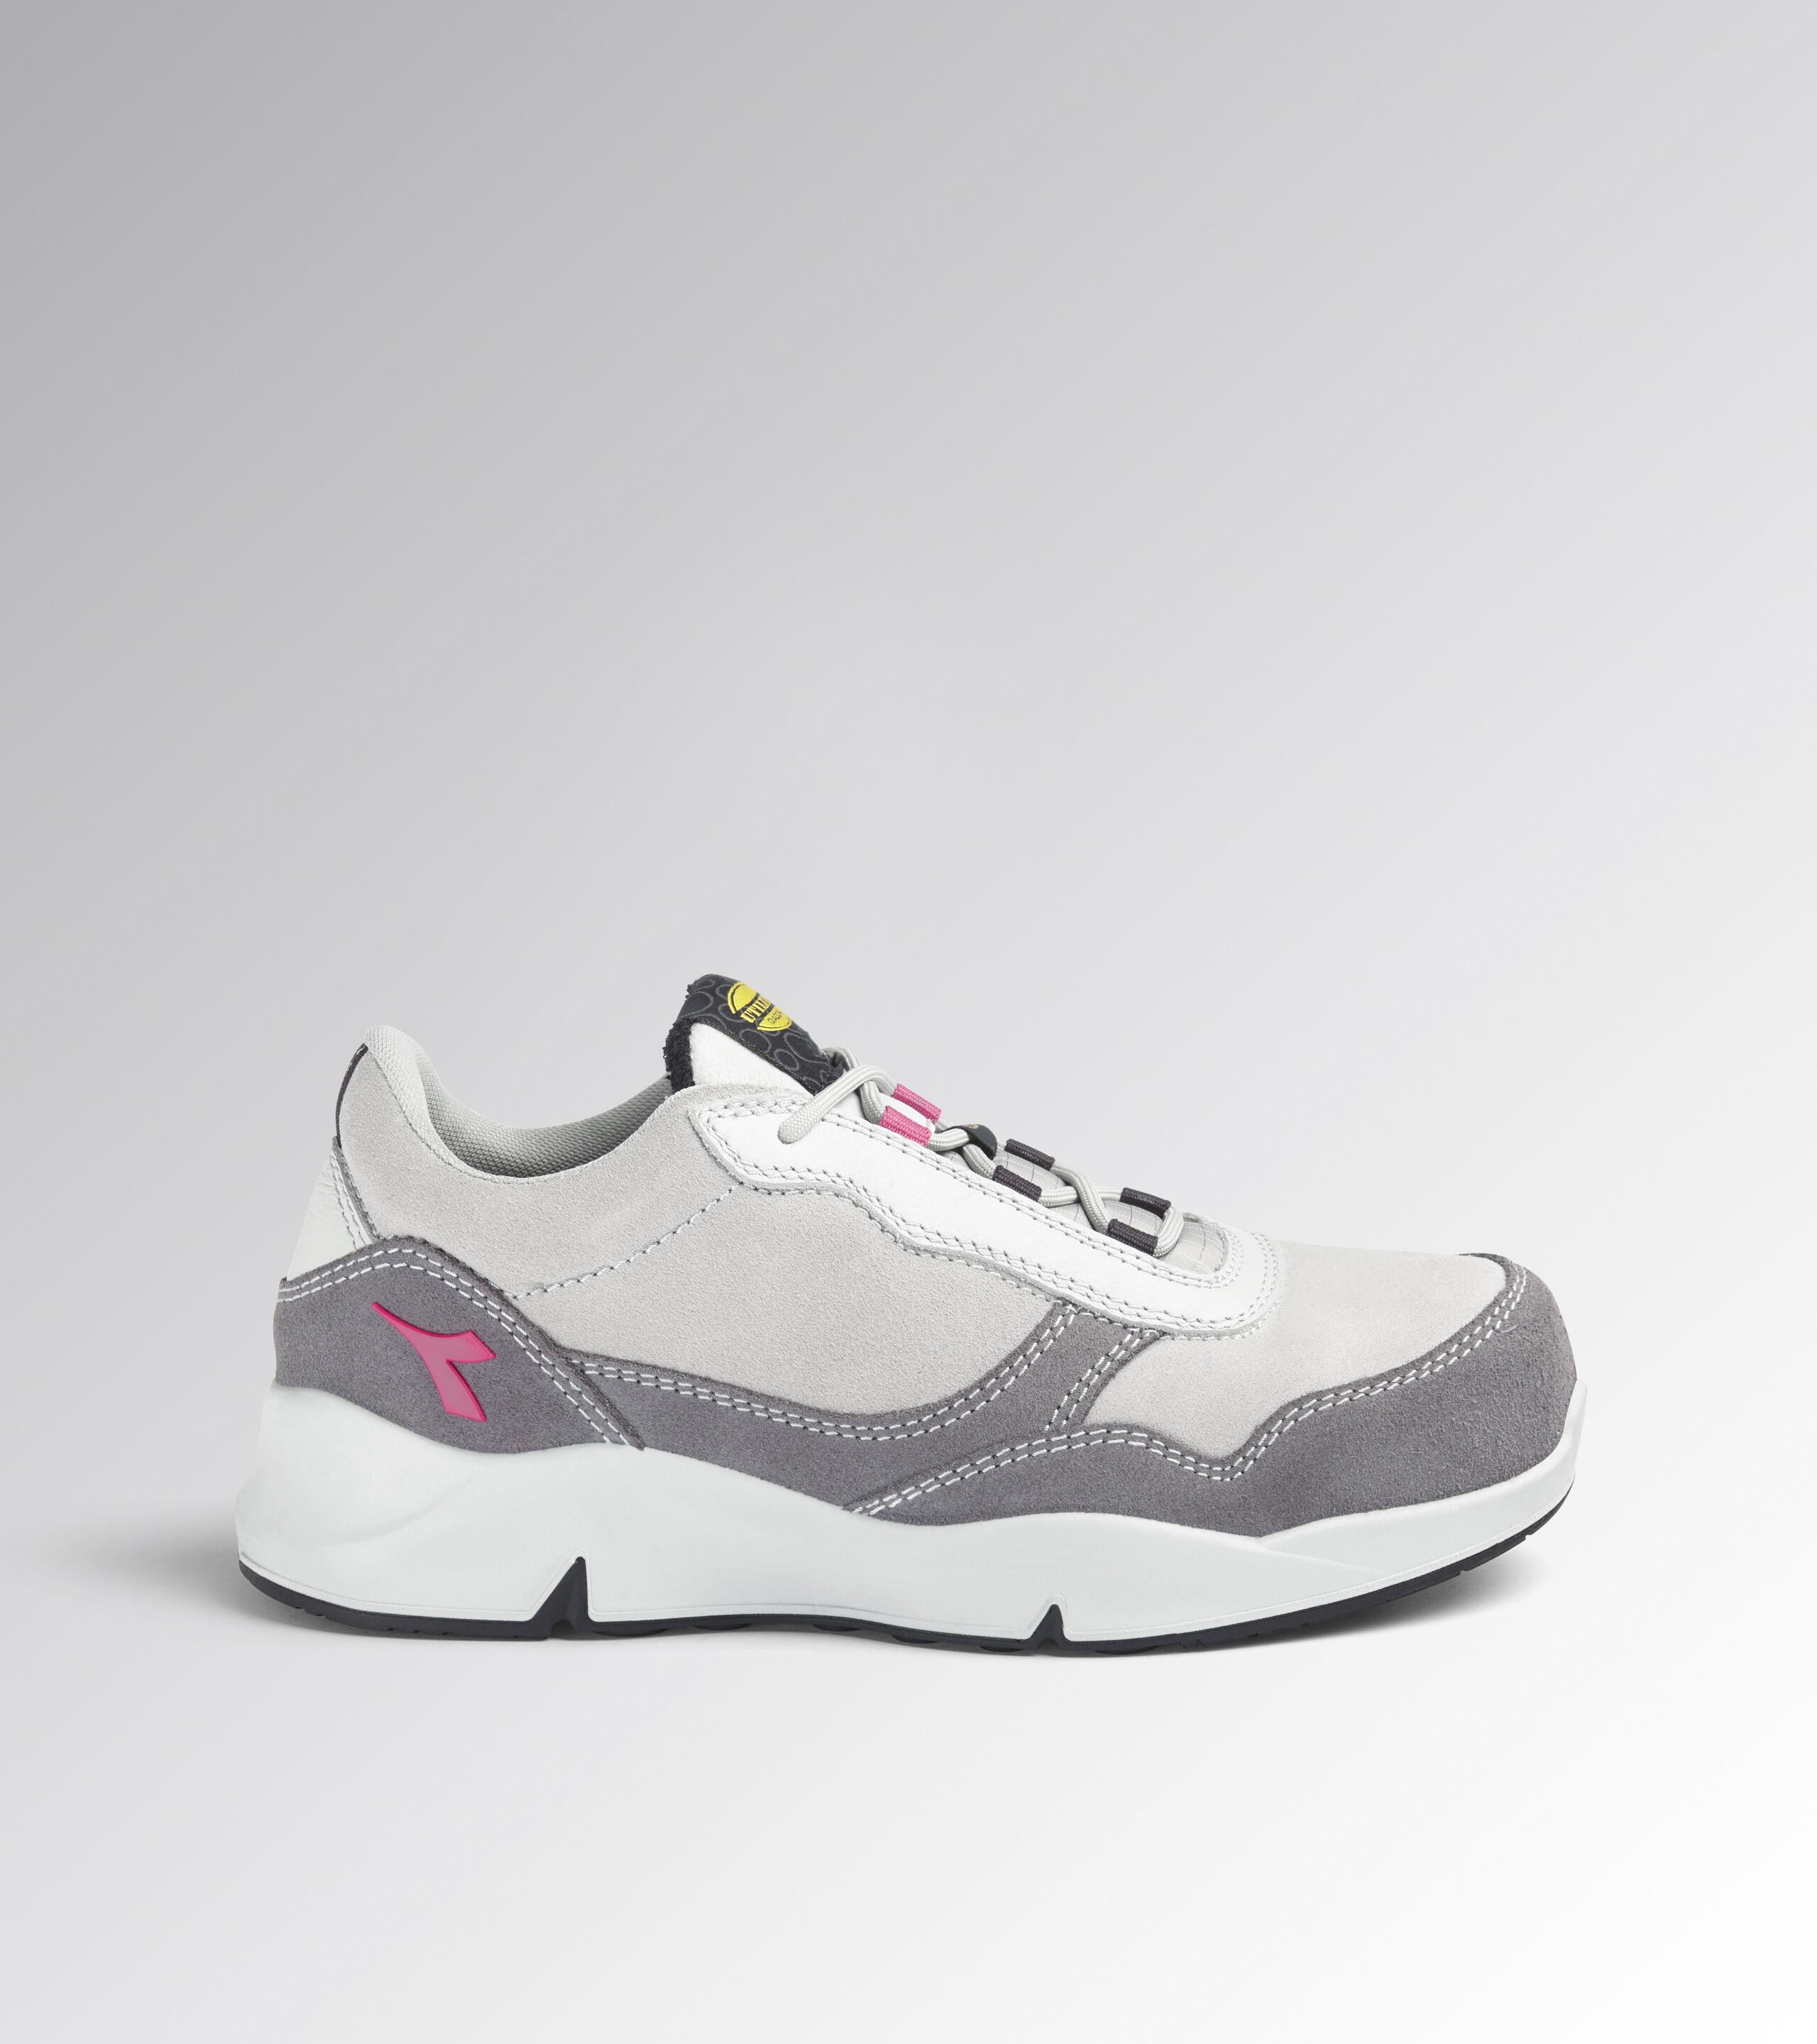 B.ICON 2 W AG Tennis shoes for hard surfaces or clay courts - Women -  Diadora Online Store